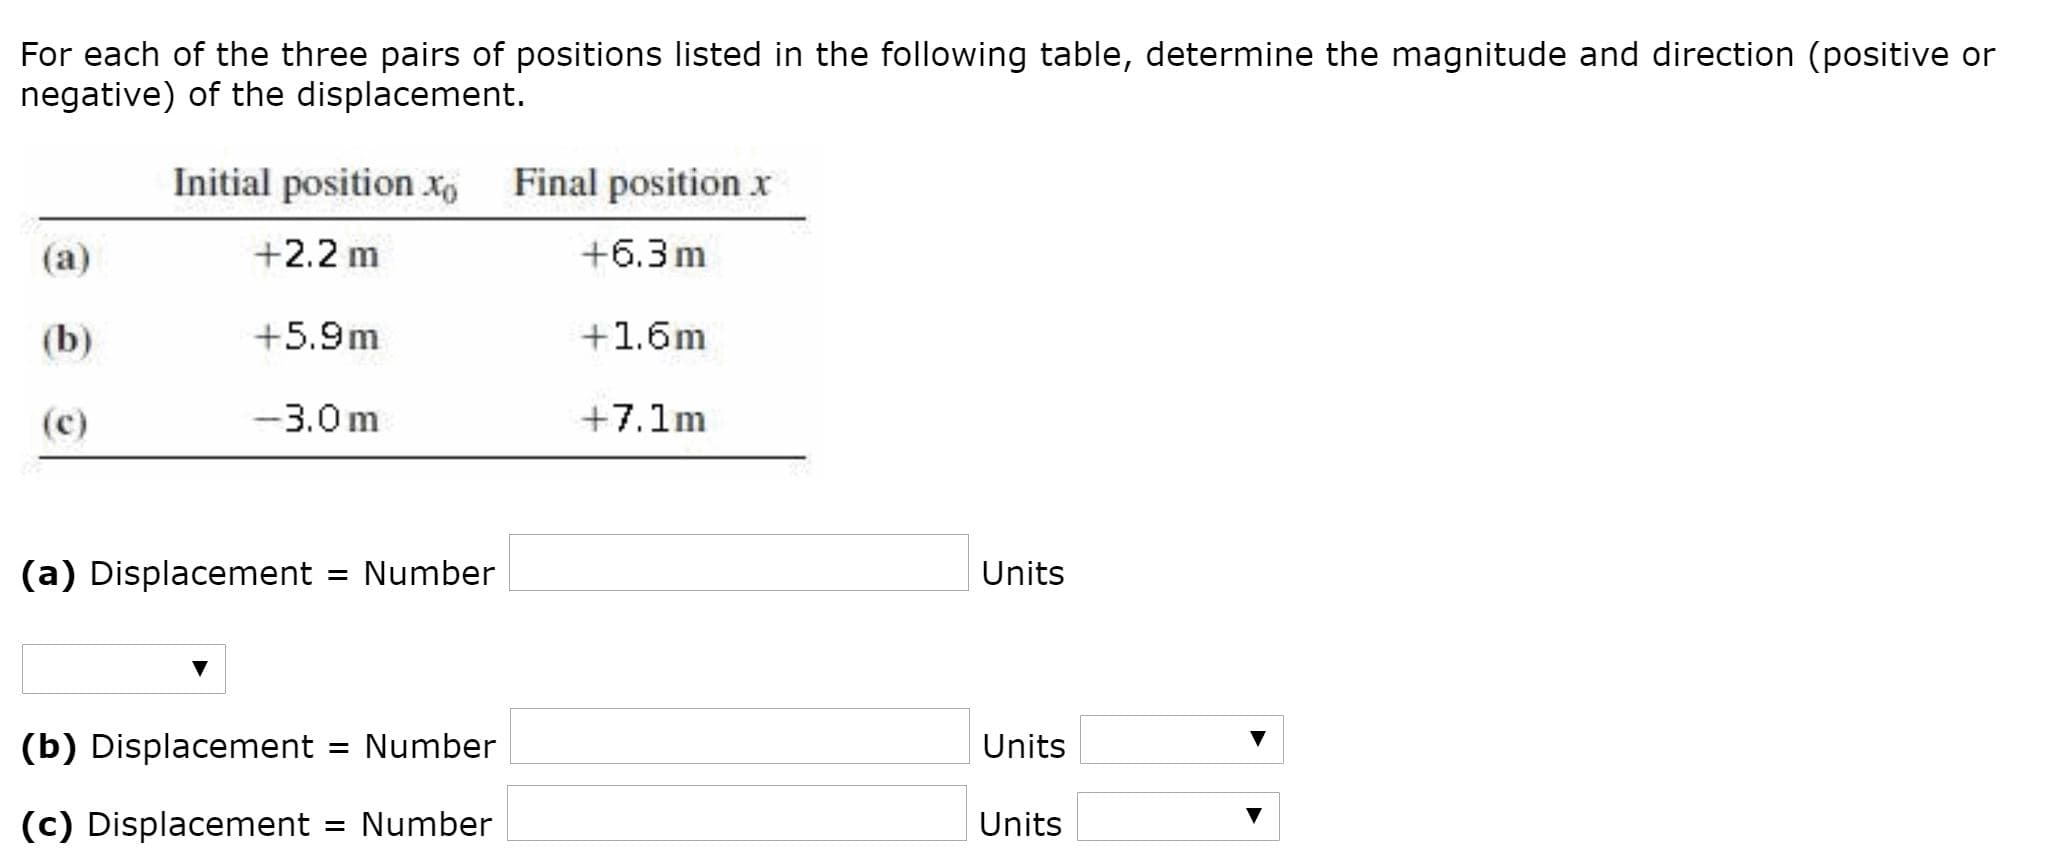 For each of the three pairs of positions listed in the following table, determine the magnitude and direction (positive or
negative) of the displacement.
Initial position xo
Final position x
+2.2 m
+6.3m
(a)
+5.9m
+1.6m
(b)
-3.0 m
+7.1m
(c)
(a) Displacement
Number
Units
%3D
(b) Displacement
Number
Units
(c) Displacement = Number
Units
